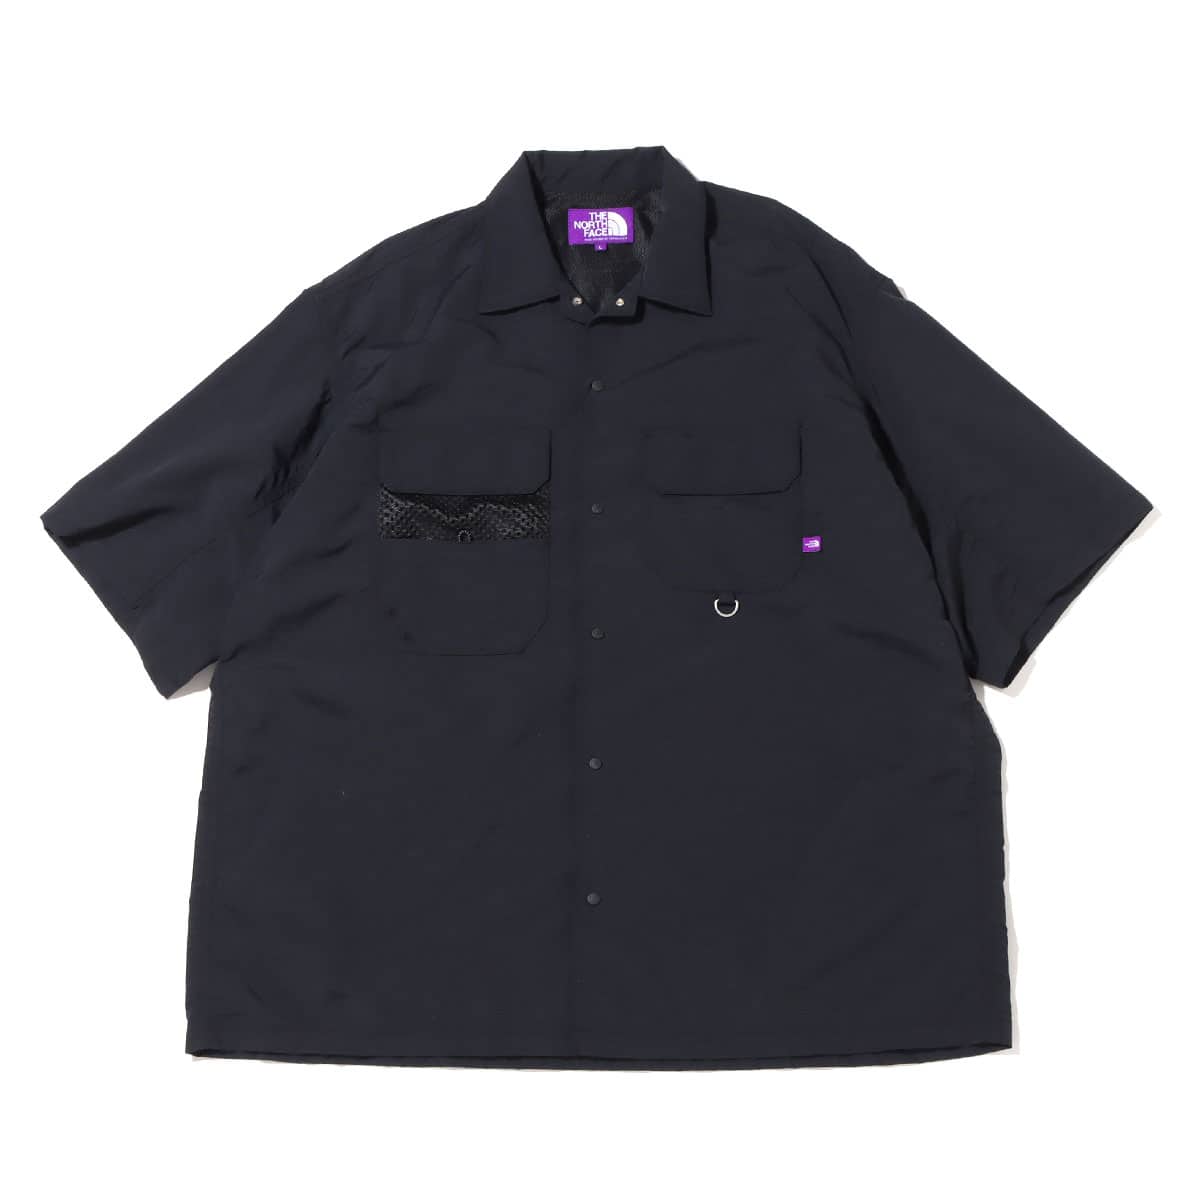 THE NORTH FACE PURPLE LABEL FIELD H/S SHIRT BLACK SS I